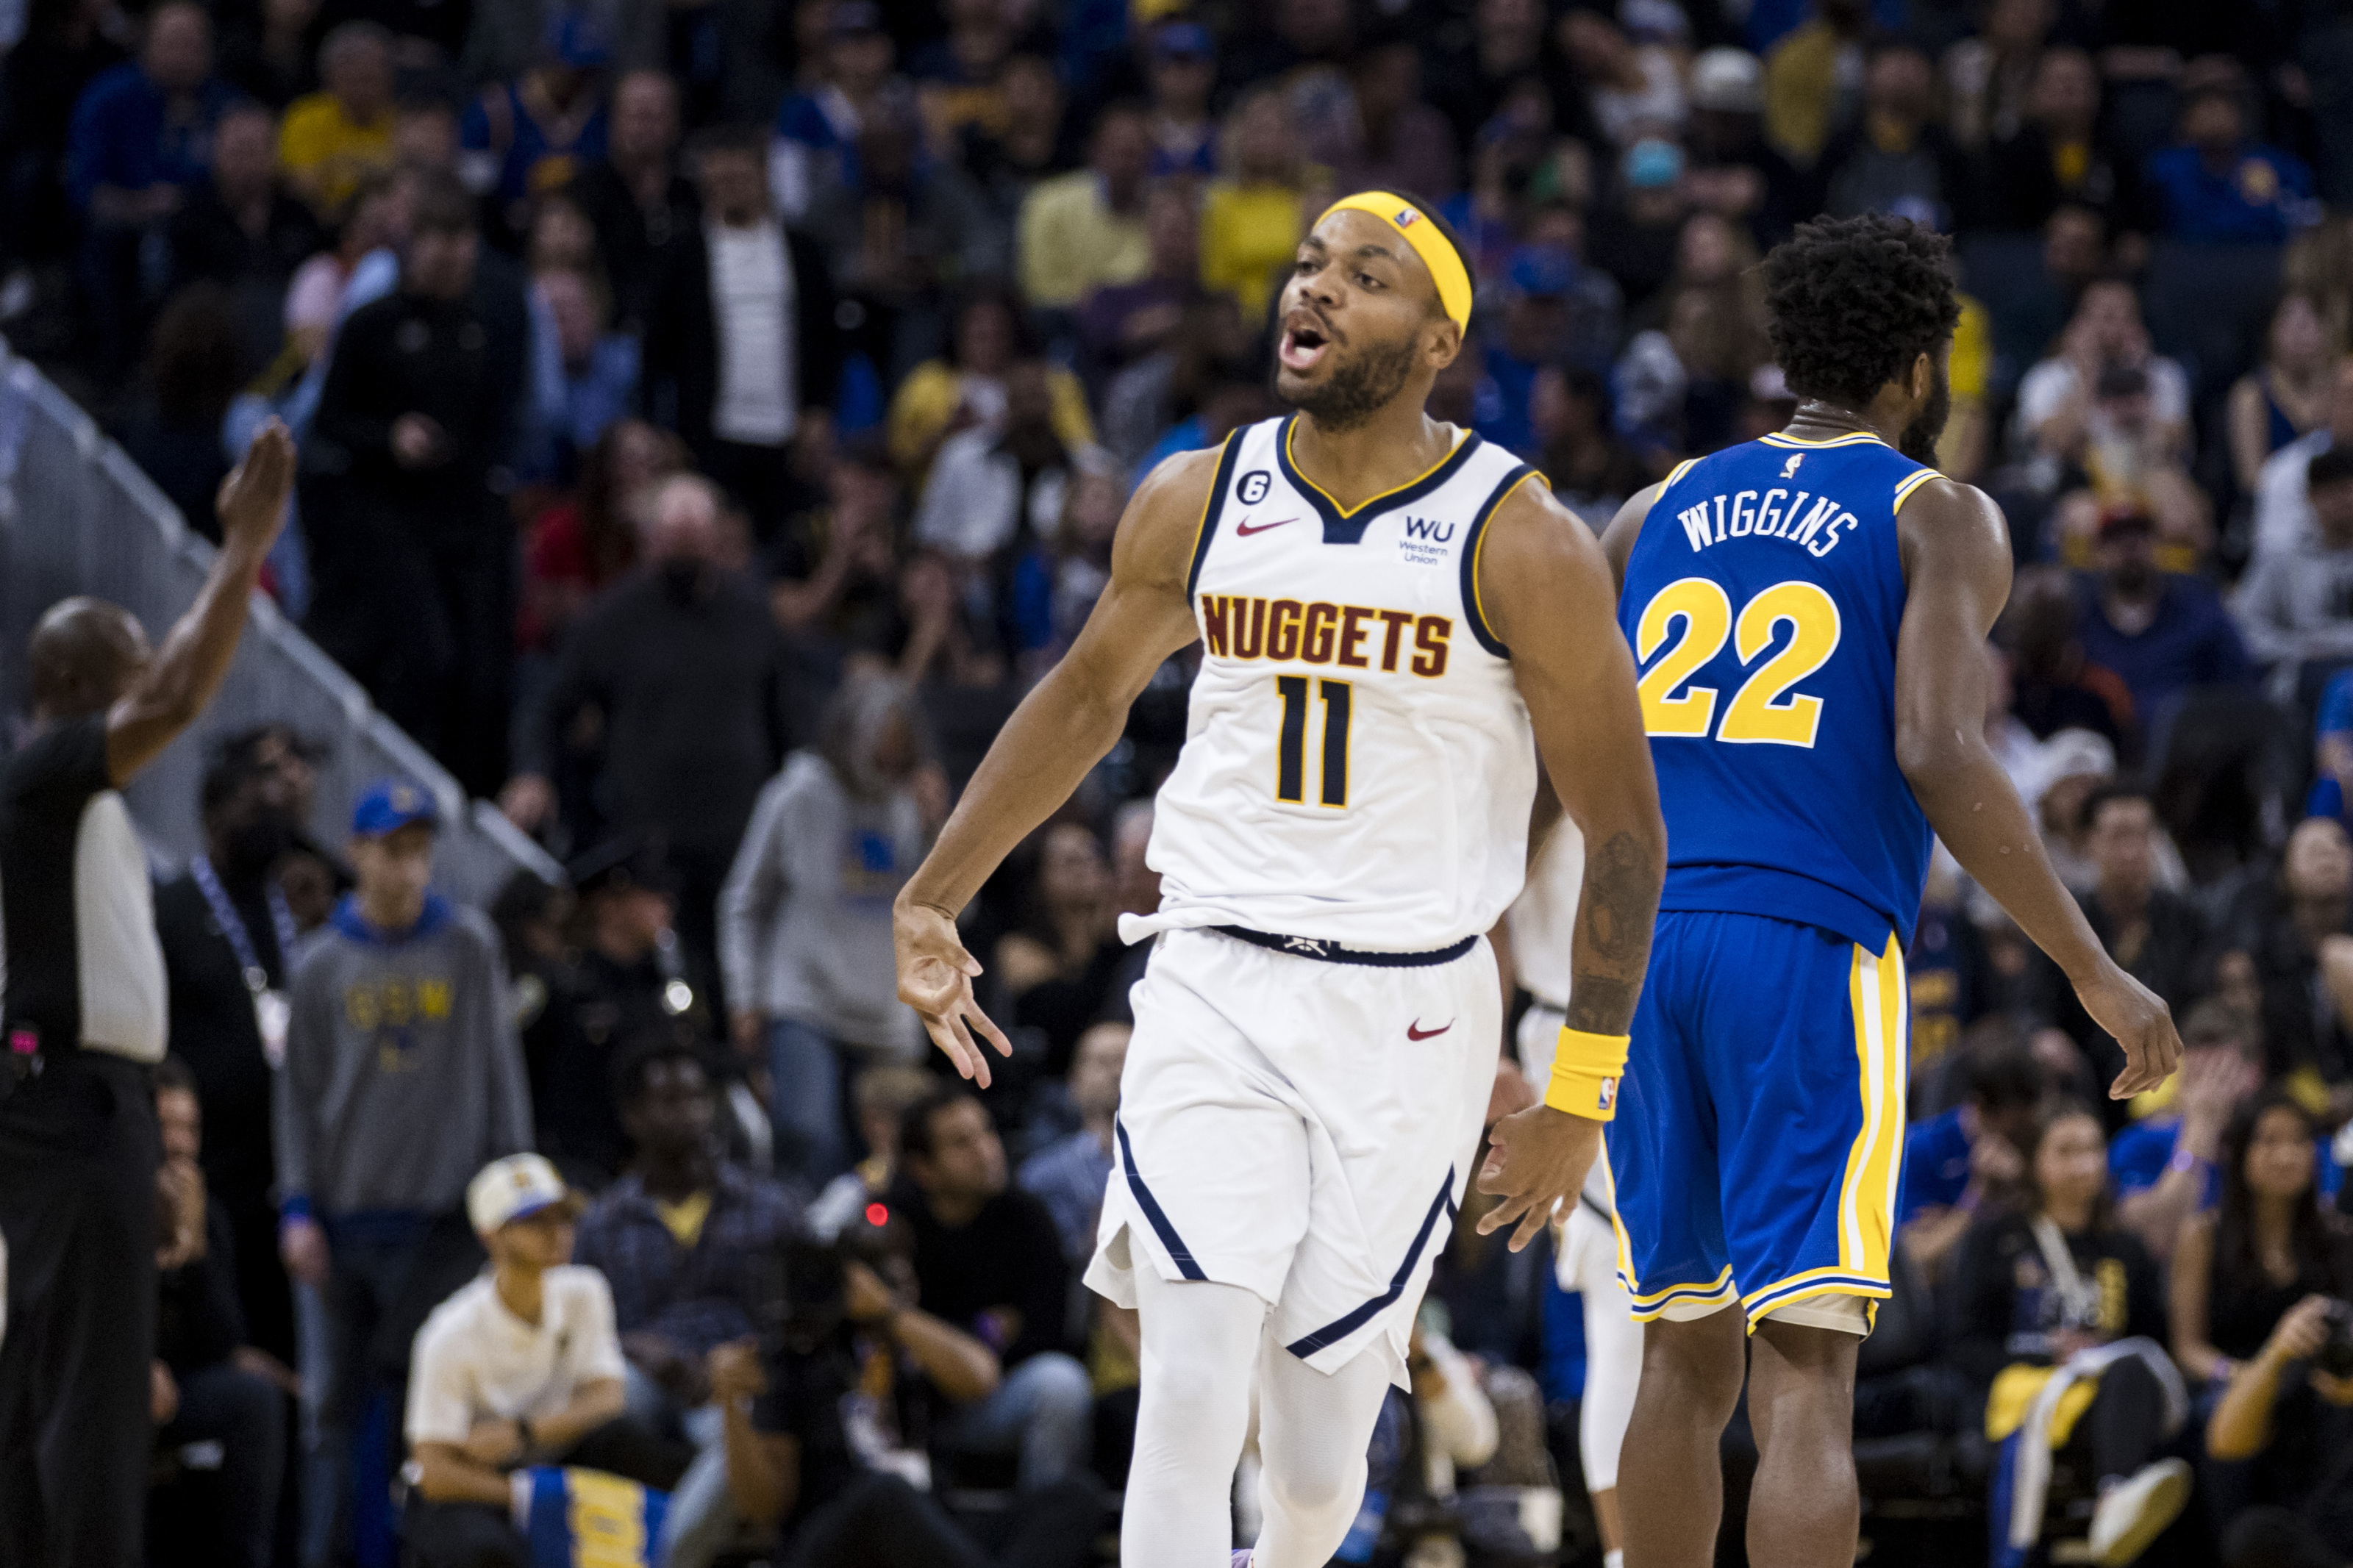 Nuggets Legendary Moments: Franchise-record 52 assists against Warriors